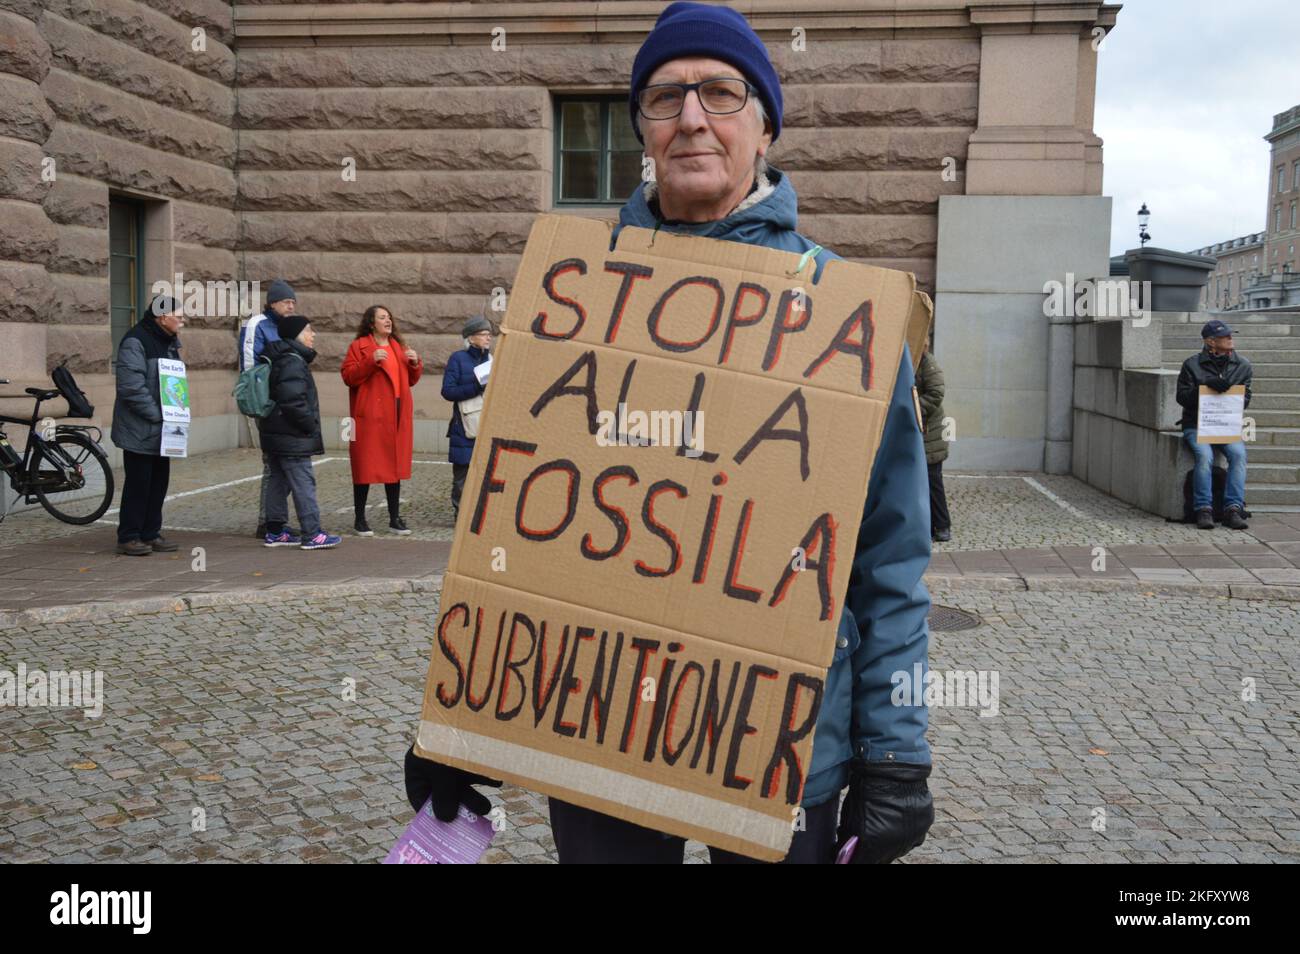 Stockholm, Sweden - November 18, 2022 - 'Stop all fossil fuel subsidies' - Rally in front of The Riksdag, Parliamnet building. (Photo by Markku Rainer Peltonen) Stock Photo